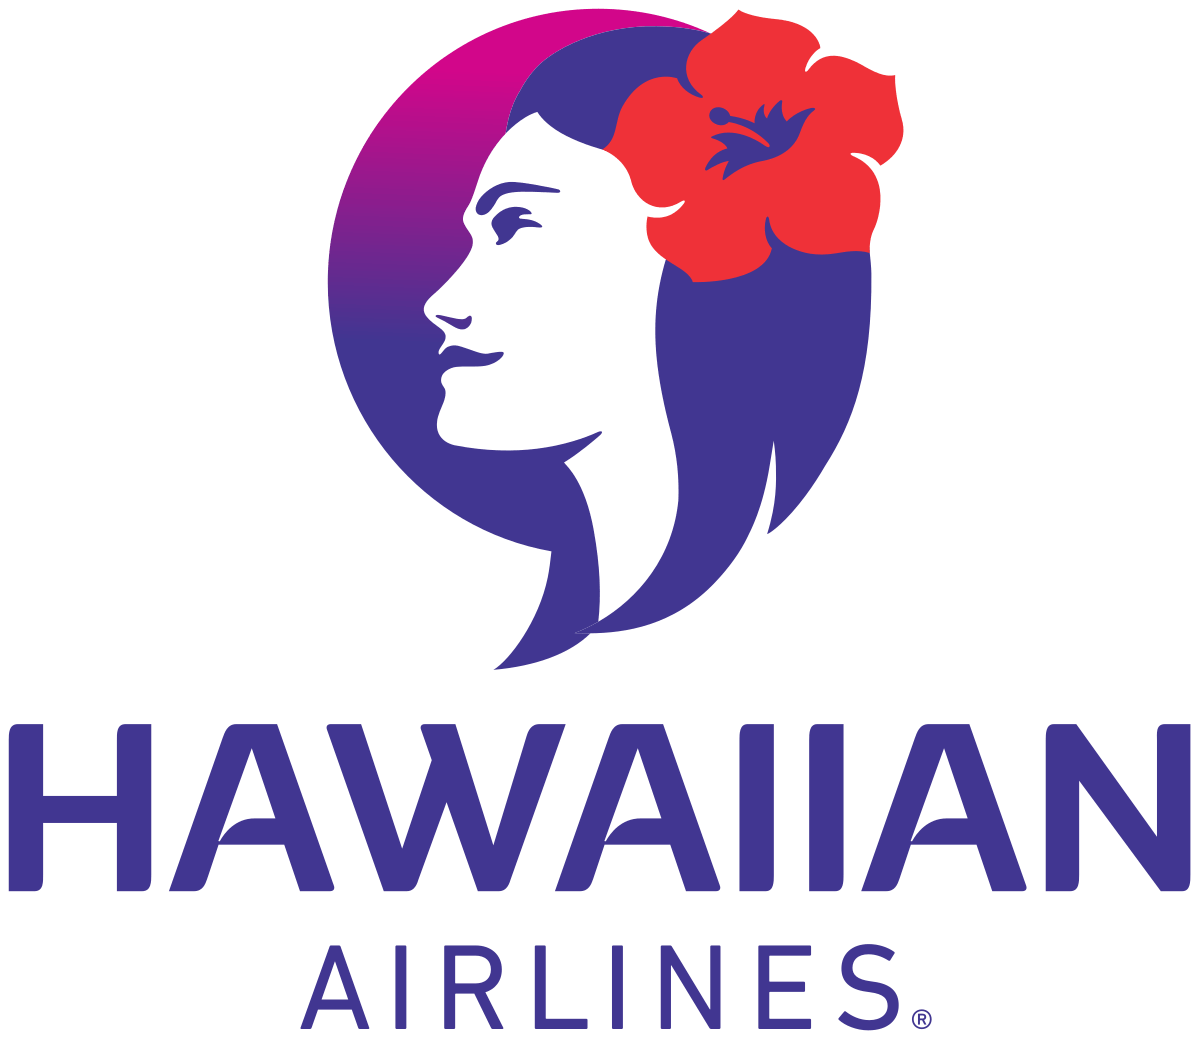 Asian Airline Logo - Hawaiian Airlines